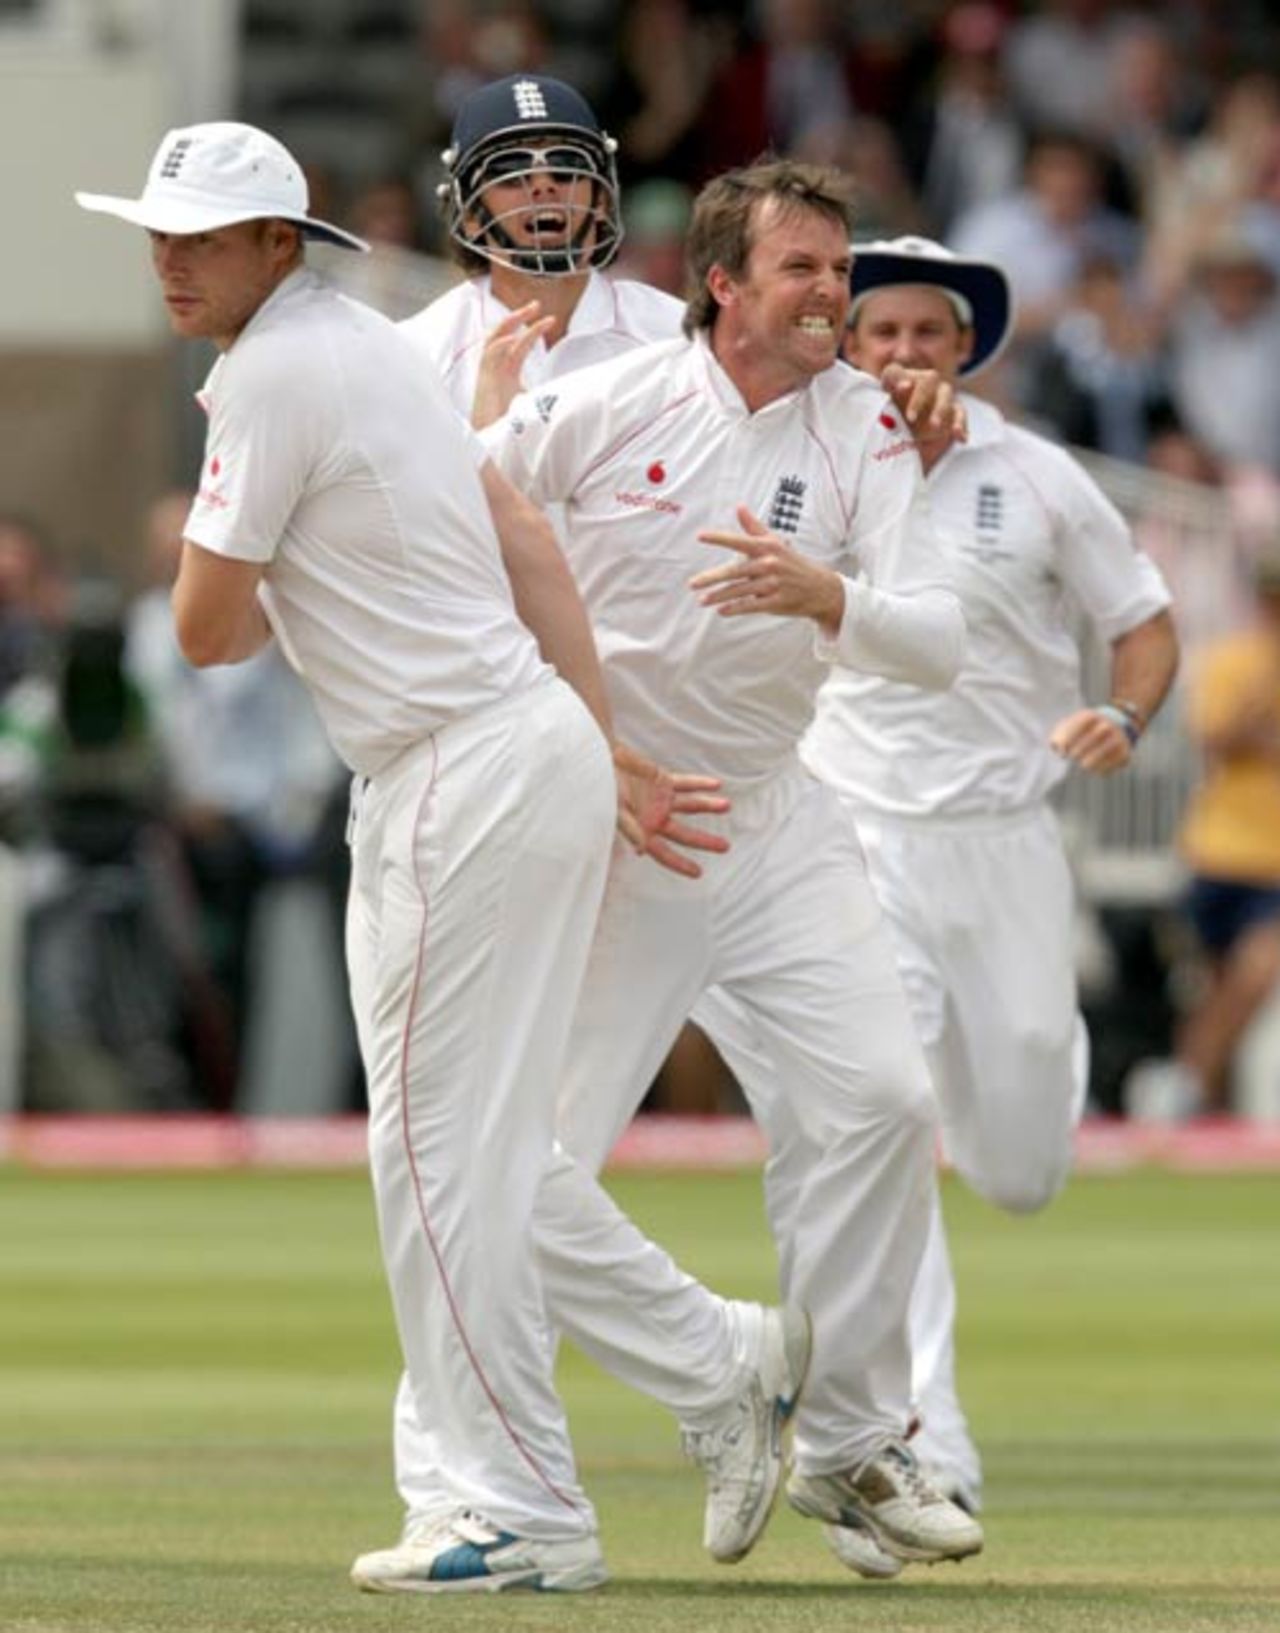 Graeme Swann is mobbed after picking up the final wicket, England v Australia, 2nd Test, Lord's, 5th day, July 20, 2009